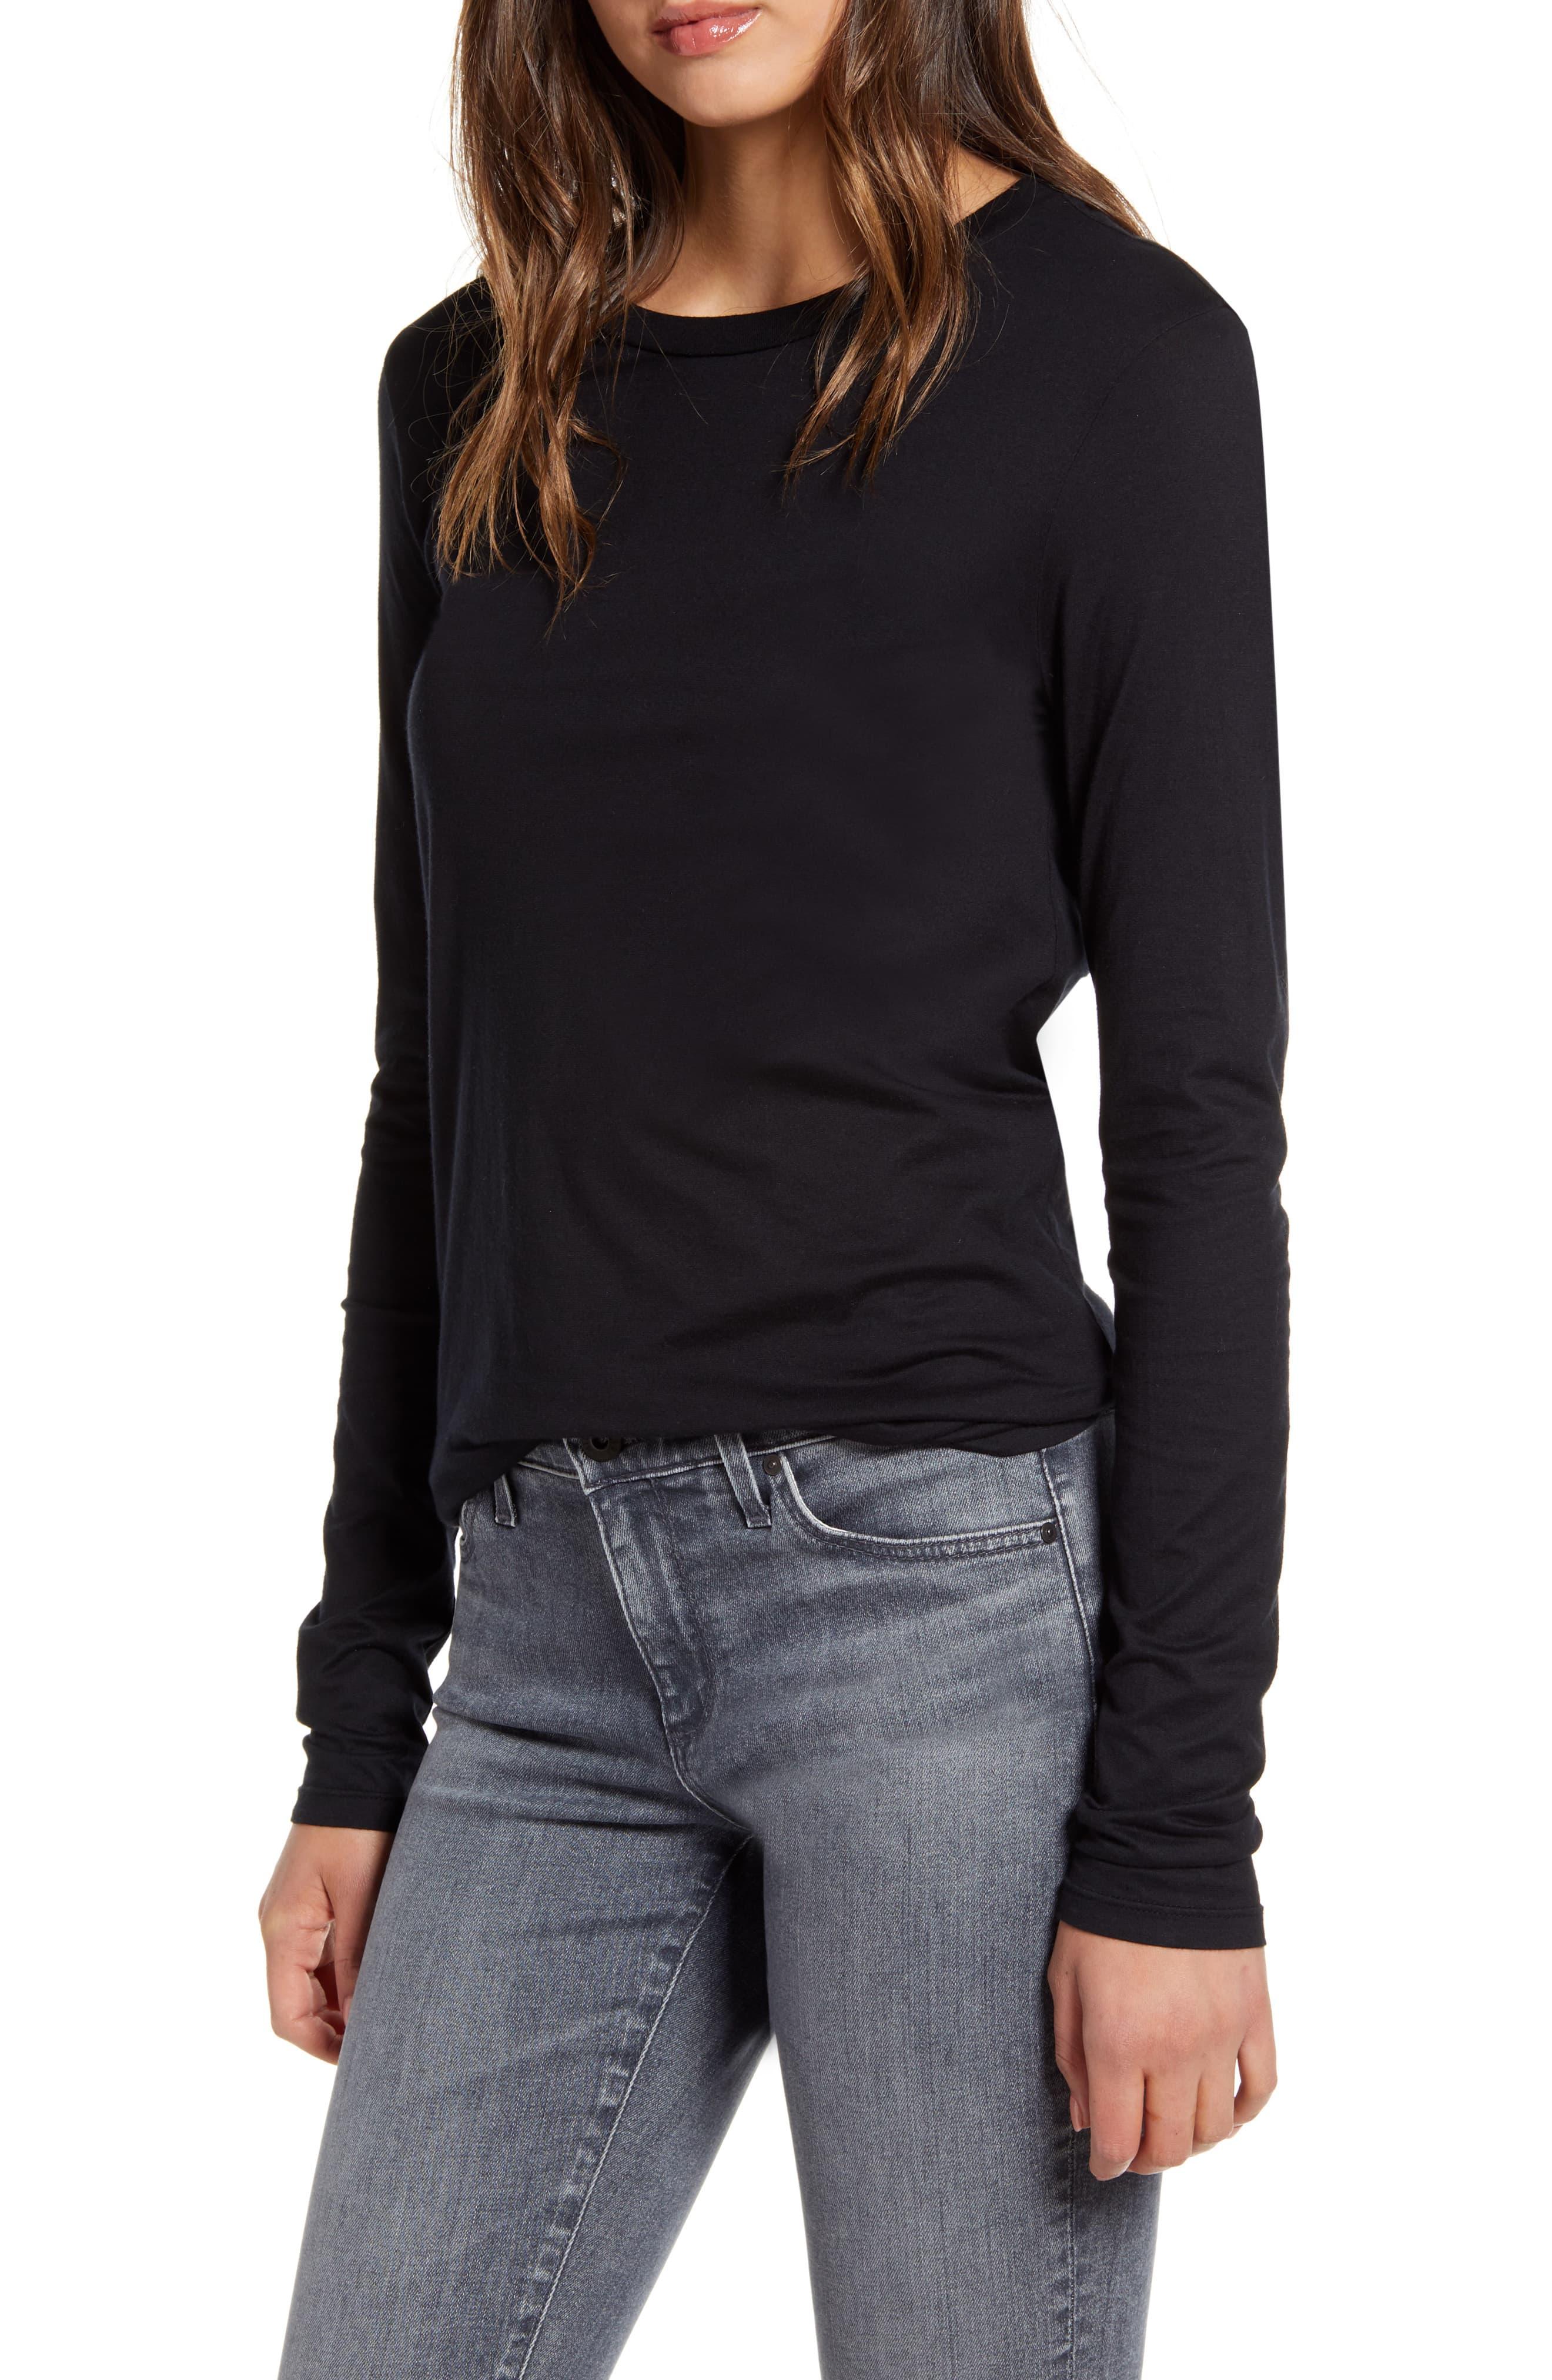 AG Jeans Lb Long Sleeve Stretch Cotton Top in Black - Lyst